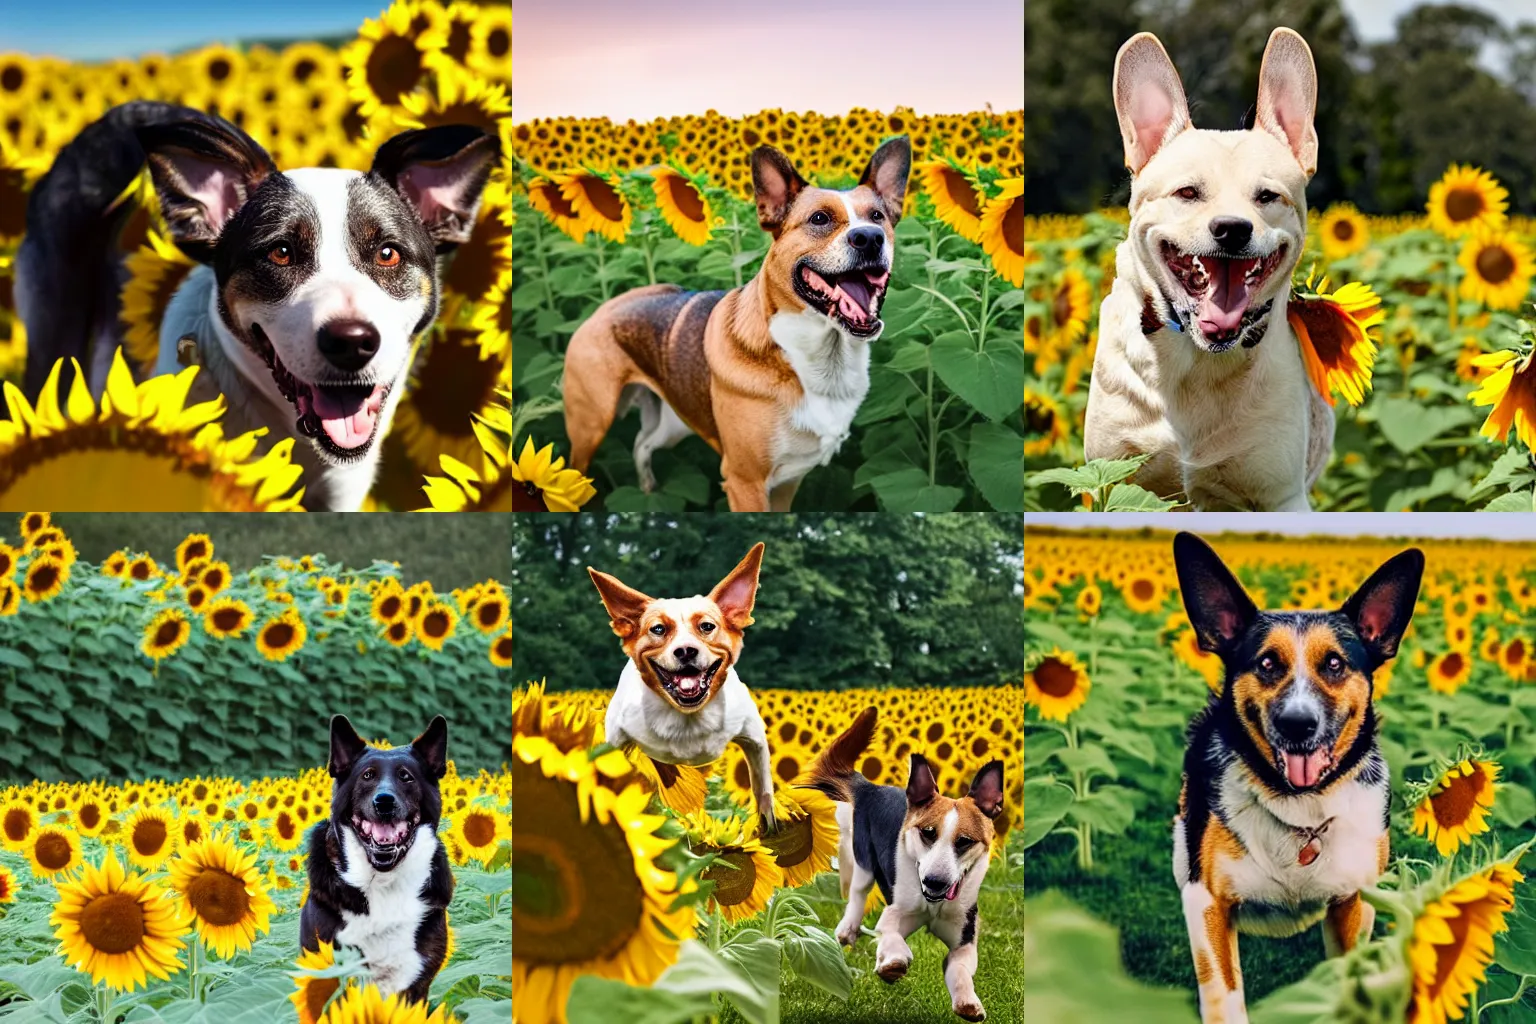 Prompt: A happy dog with floppy ears running through a field of sunflowers